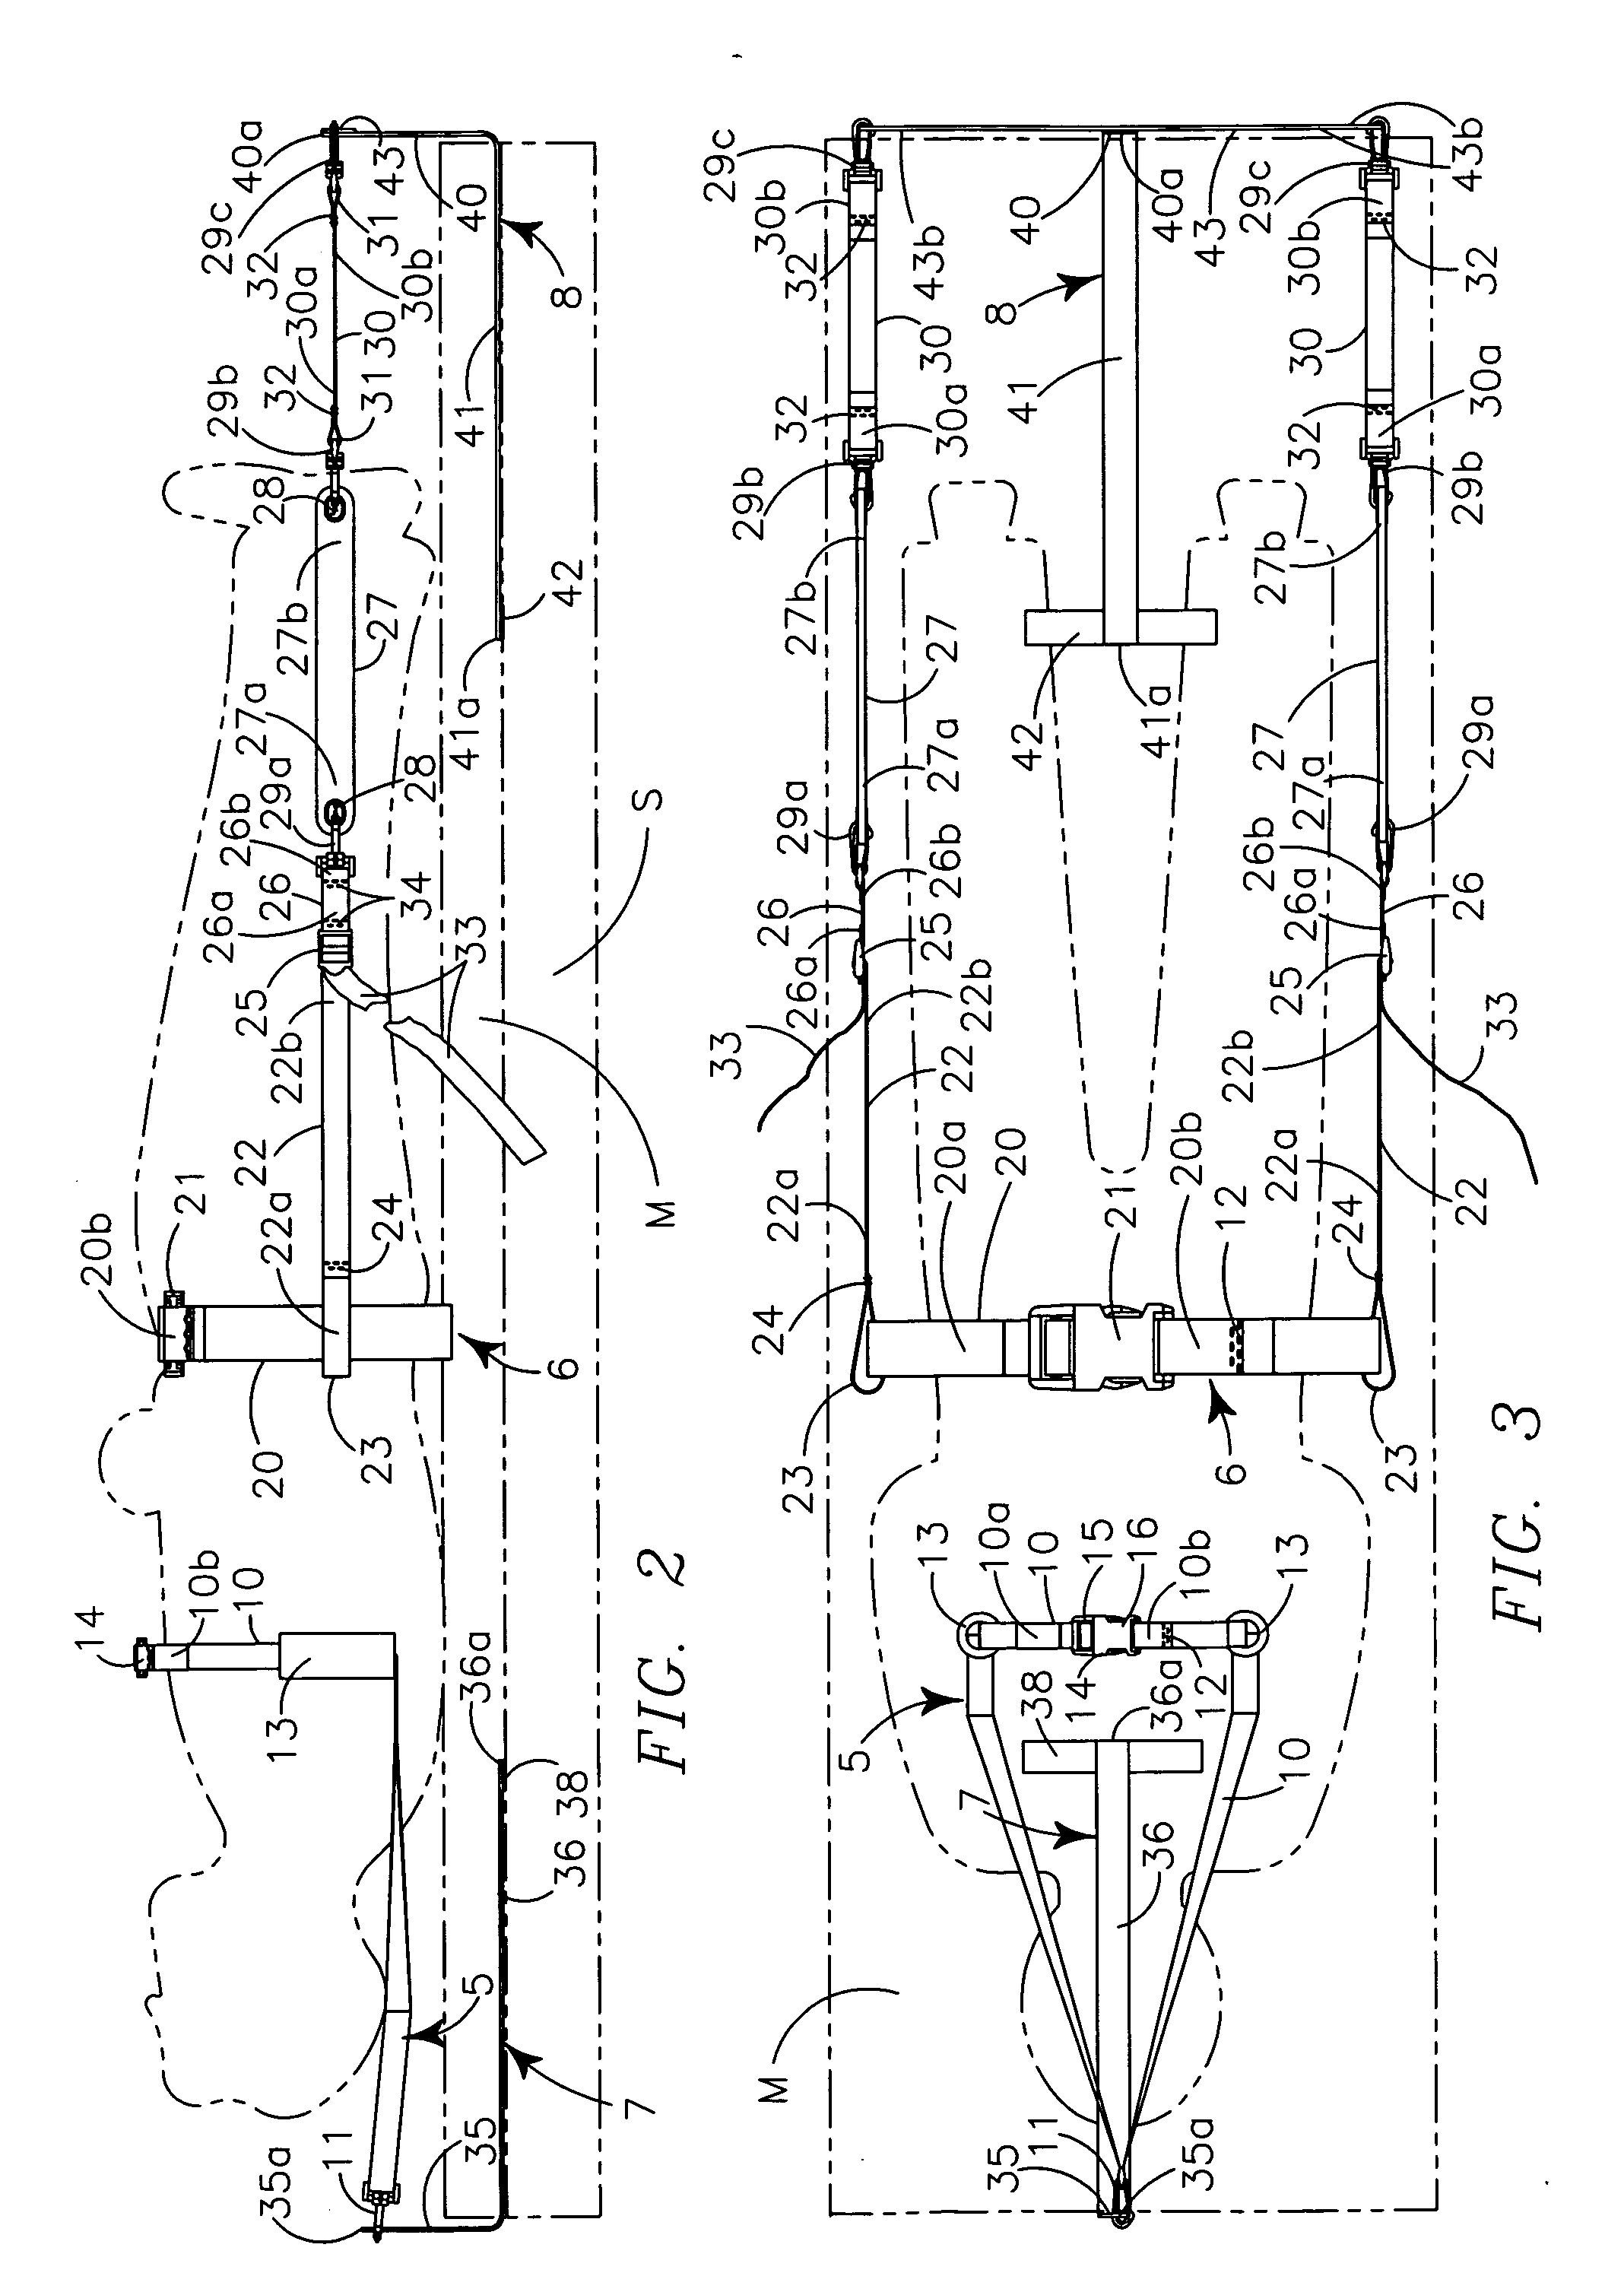 Device for self administration of lumbar traction